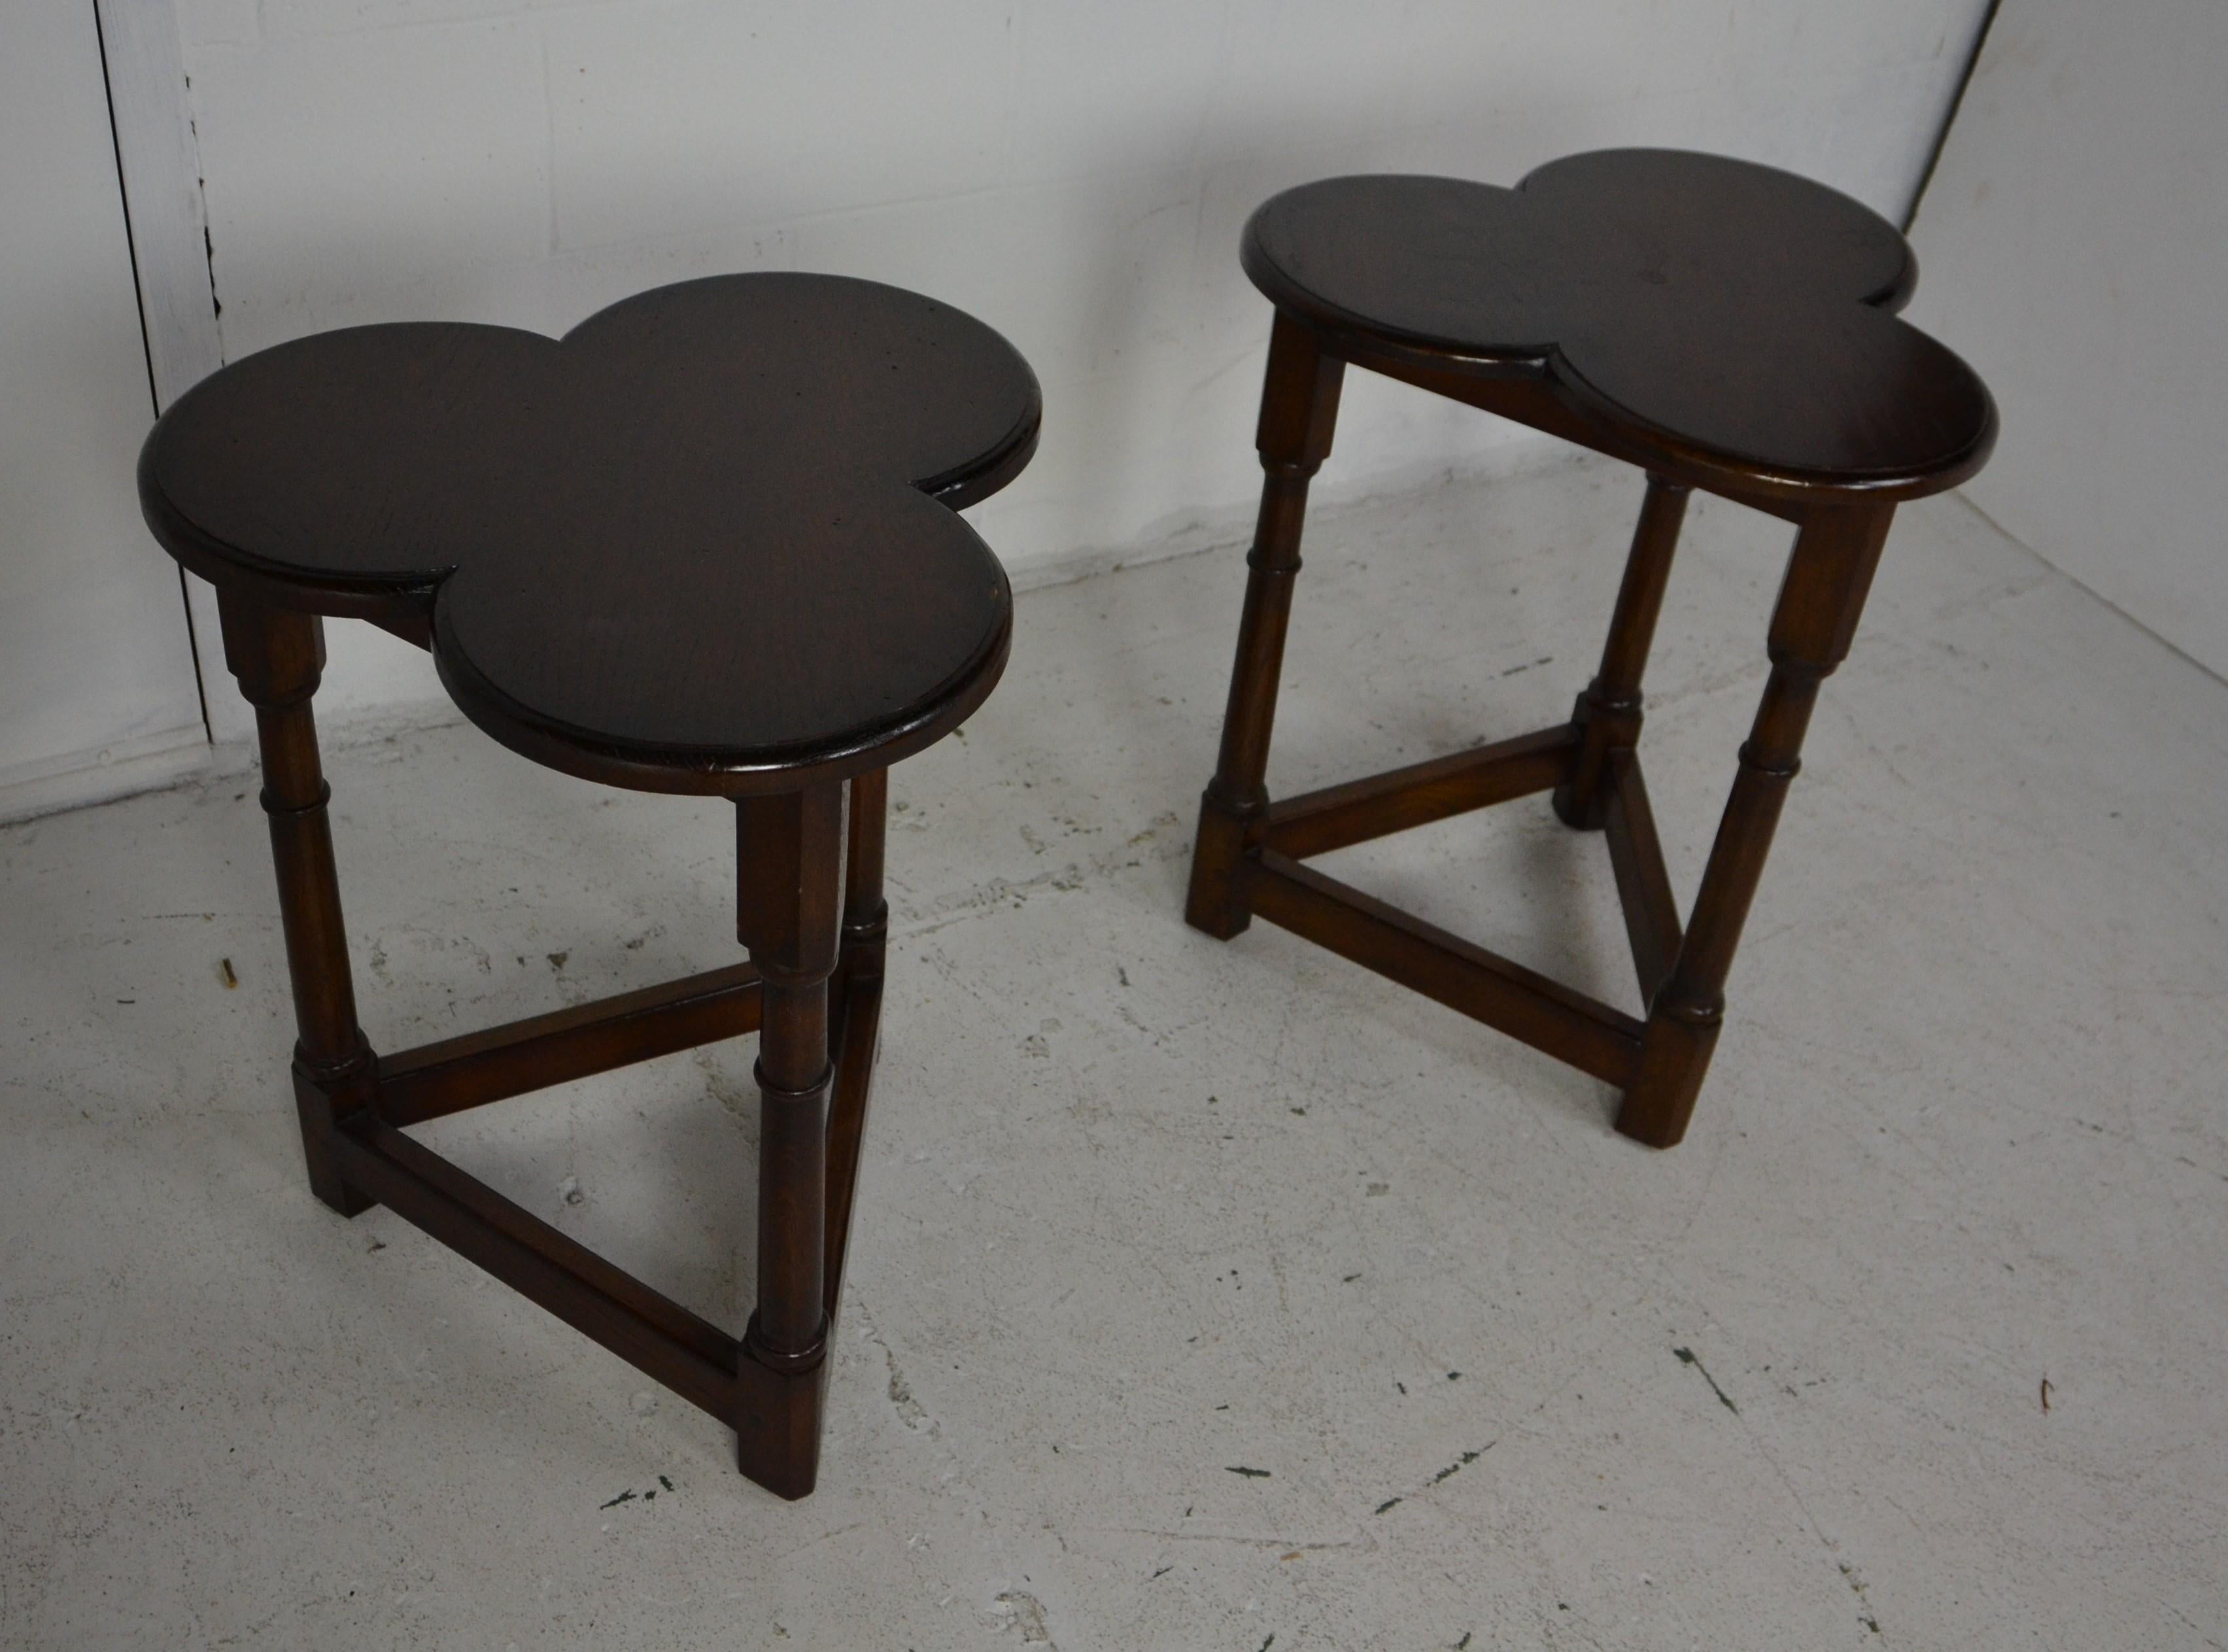 A pair of Clover-leaf style Side Tables in solid oak. Turned legs, 3 leaf clover shaped tops. Designed and manufactured in the English 17th. century style by an American company. 
 ( 